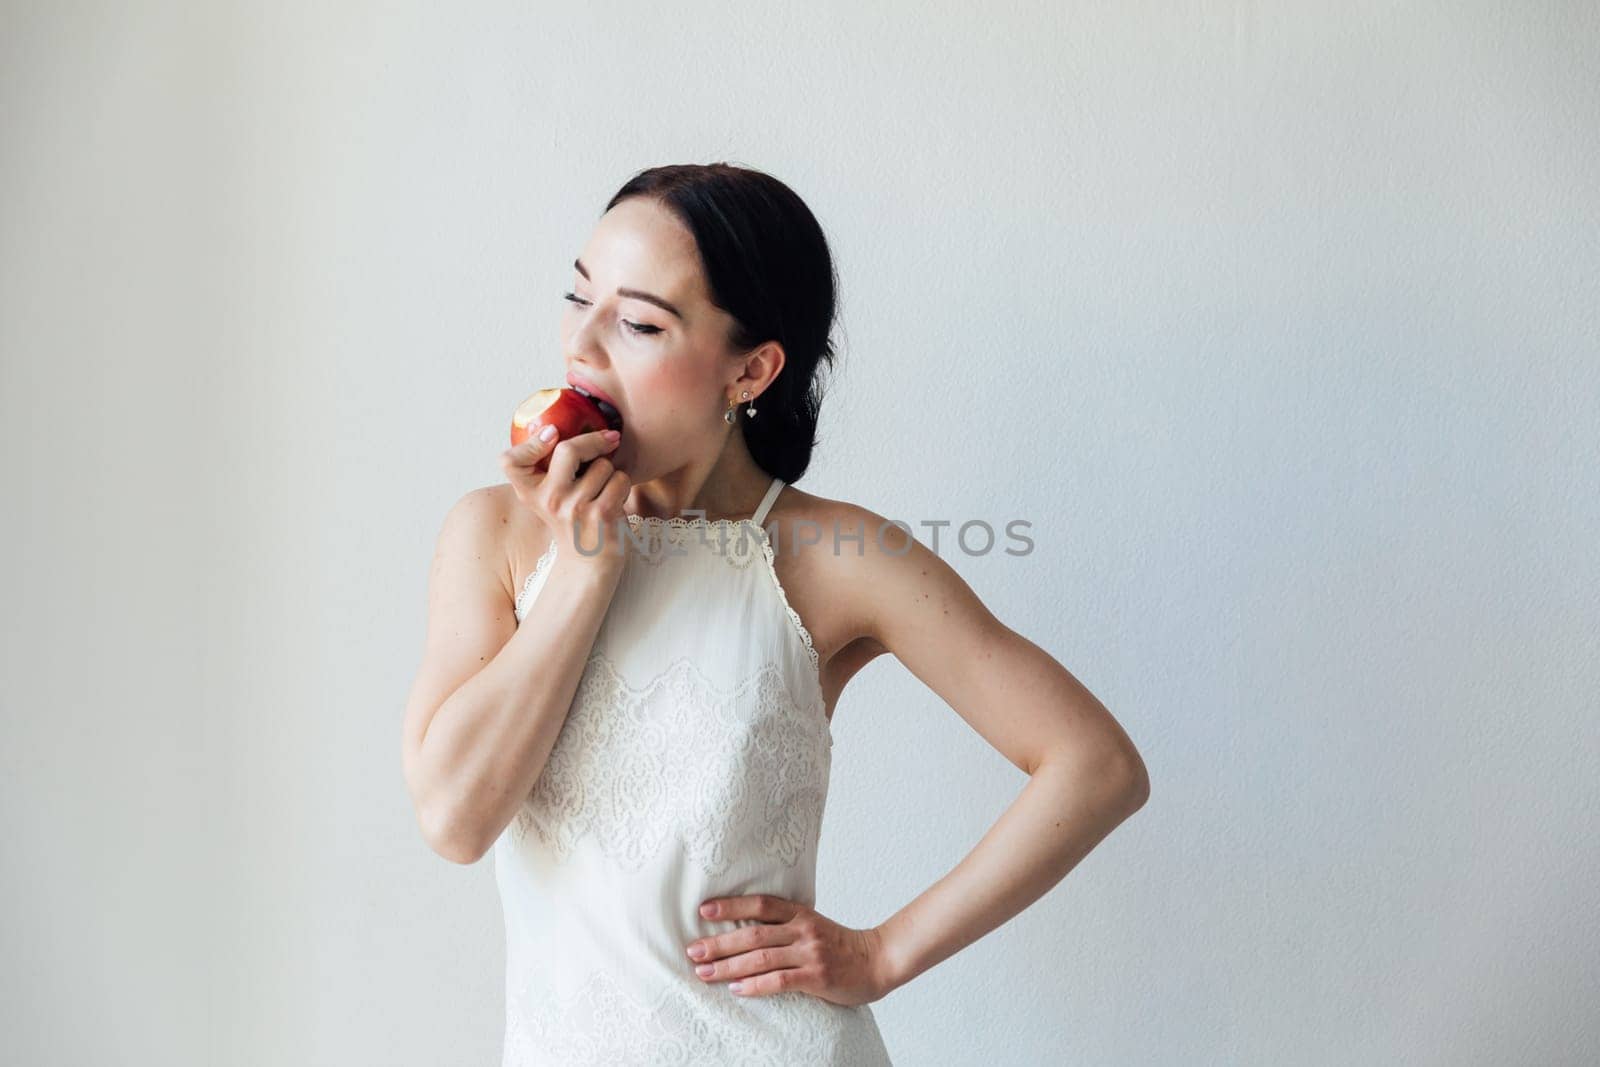 beautiful woman and delicious apple for food by Simakov